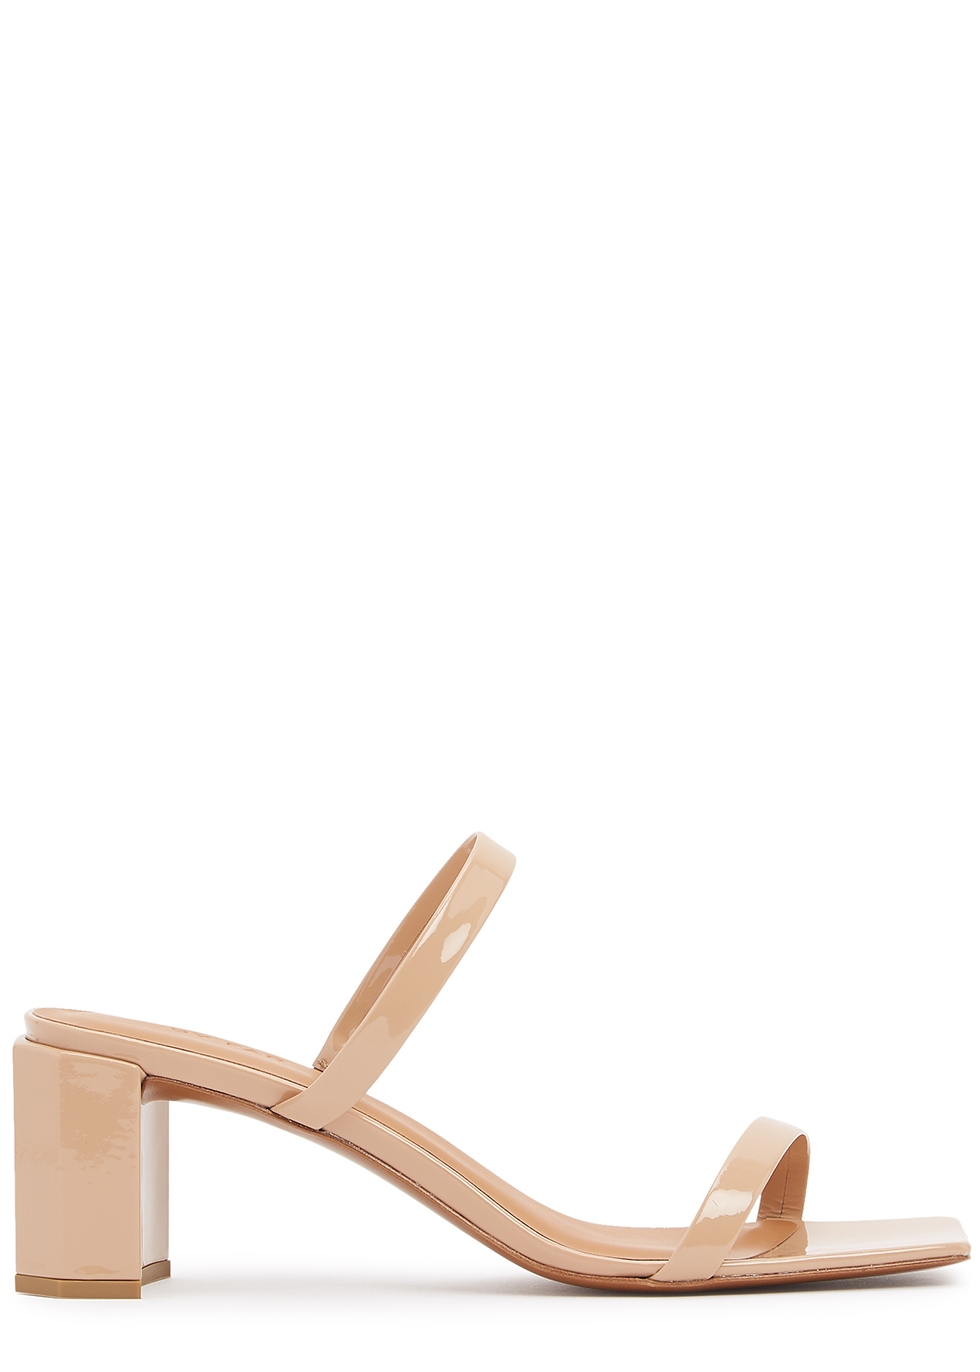 Tanya 75 camel patent leather mules